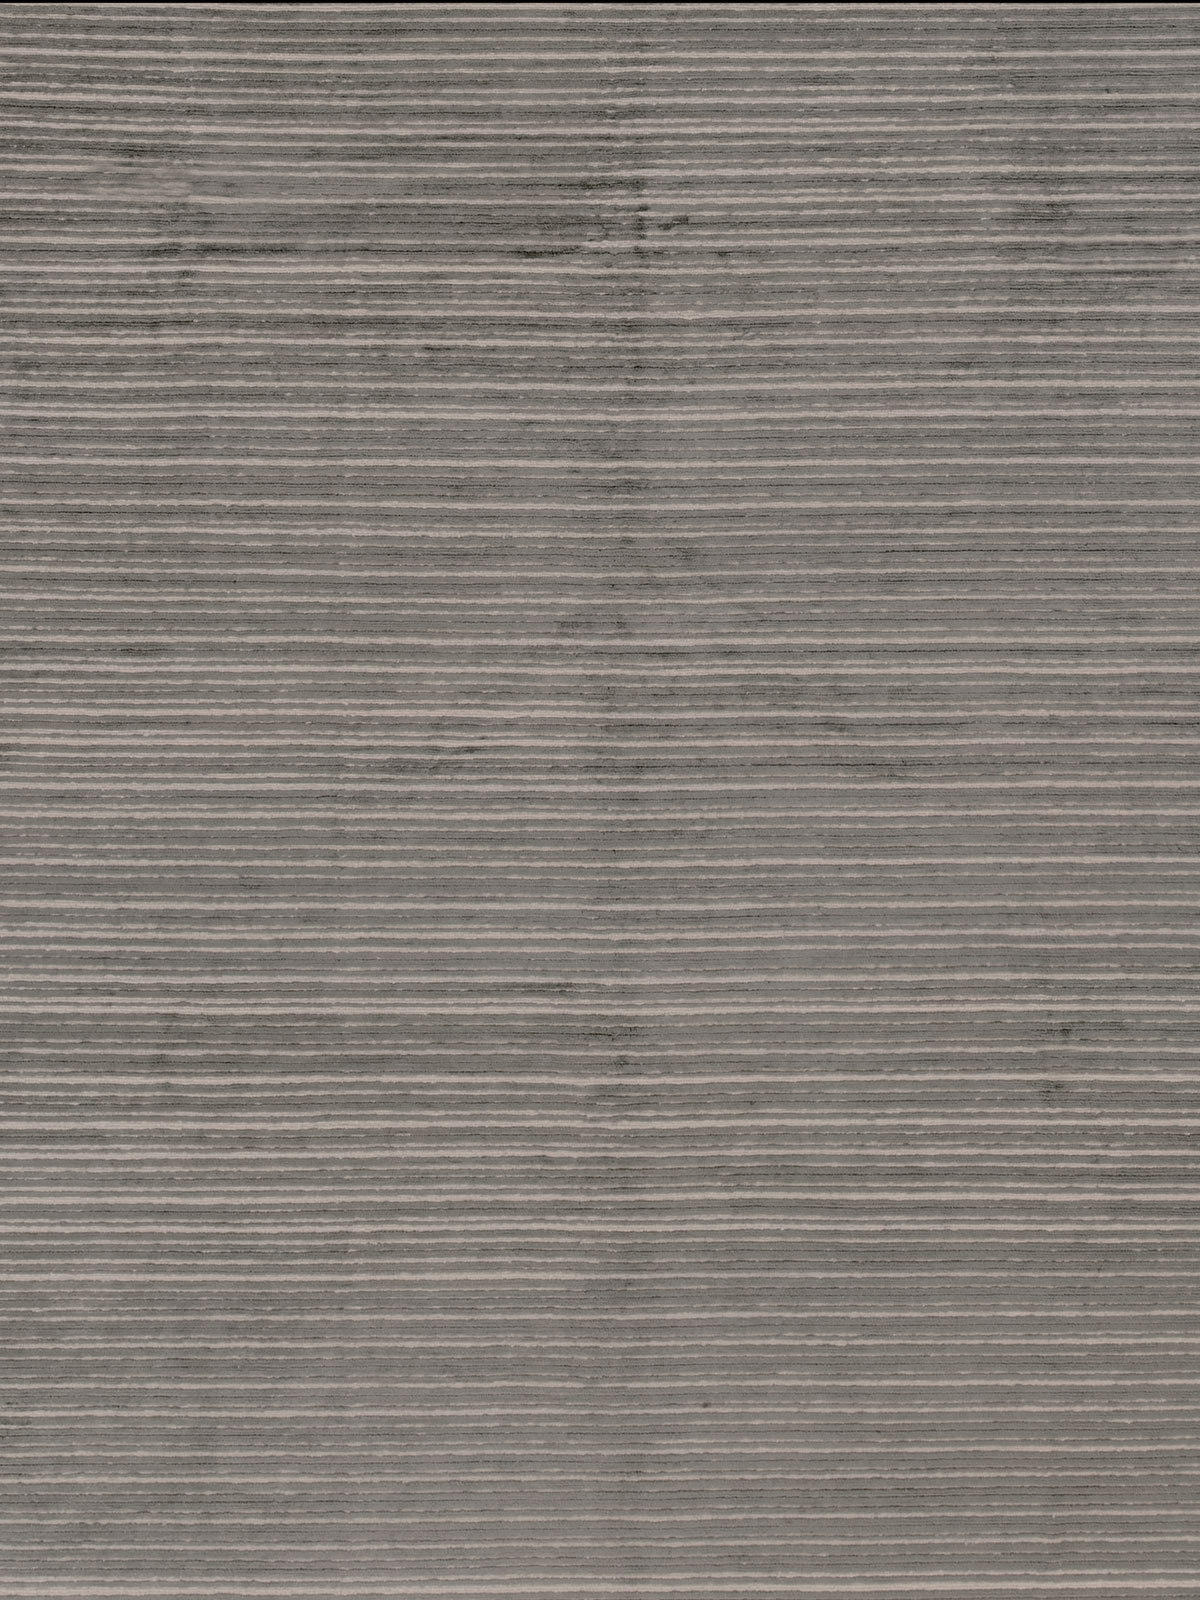 Eccelso Beige Grey Handknotted Rug ☞ Size: 300 x 400 cm